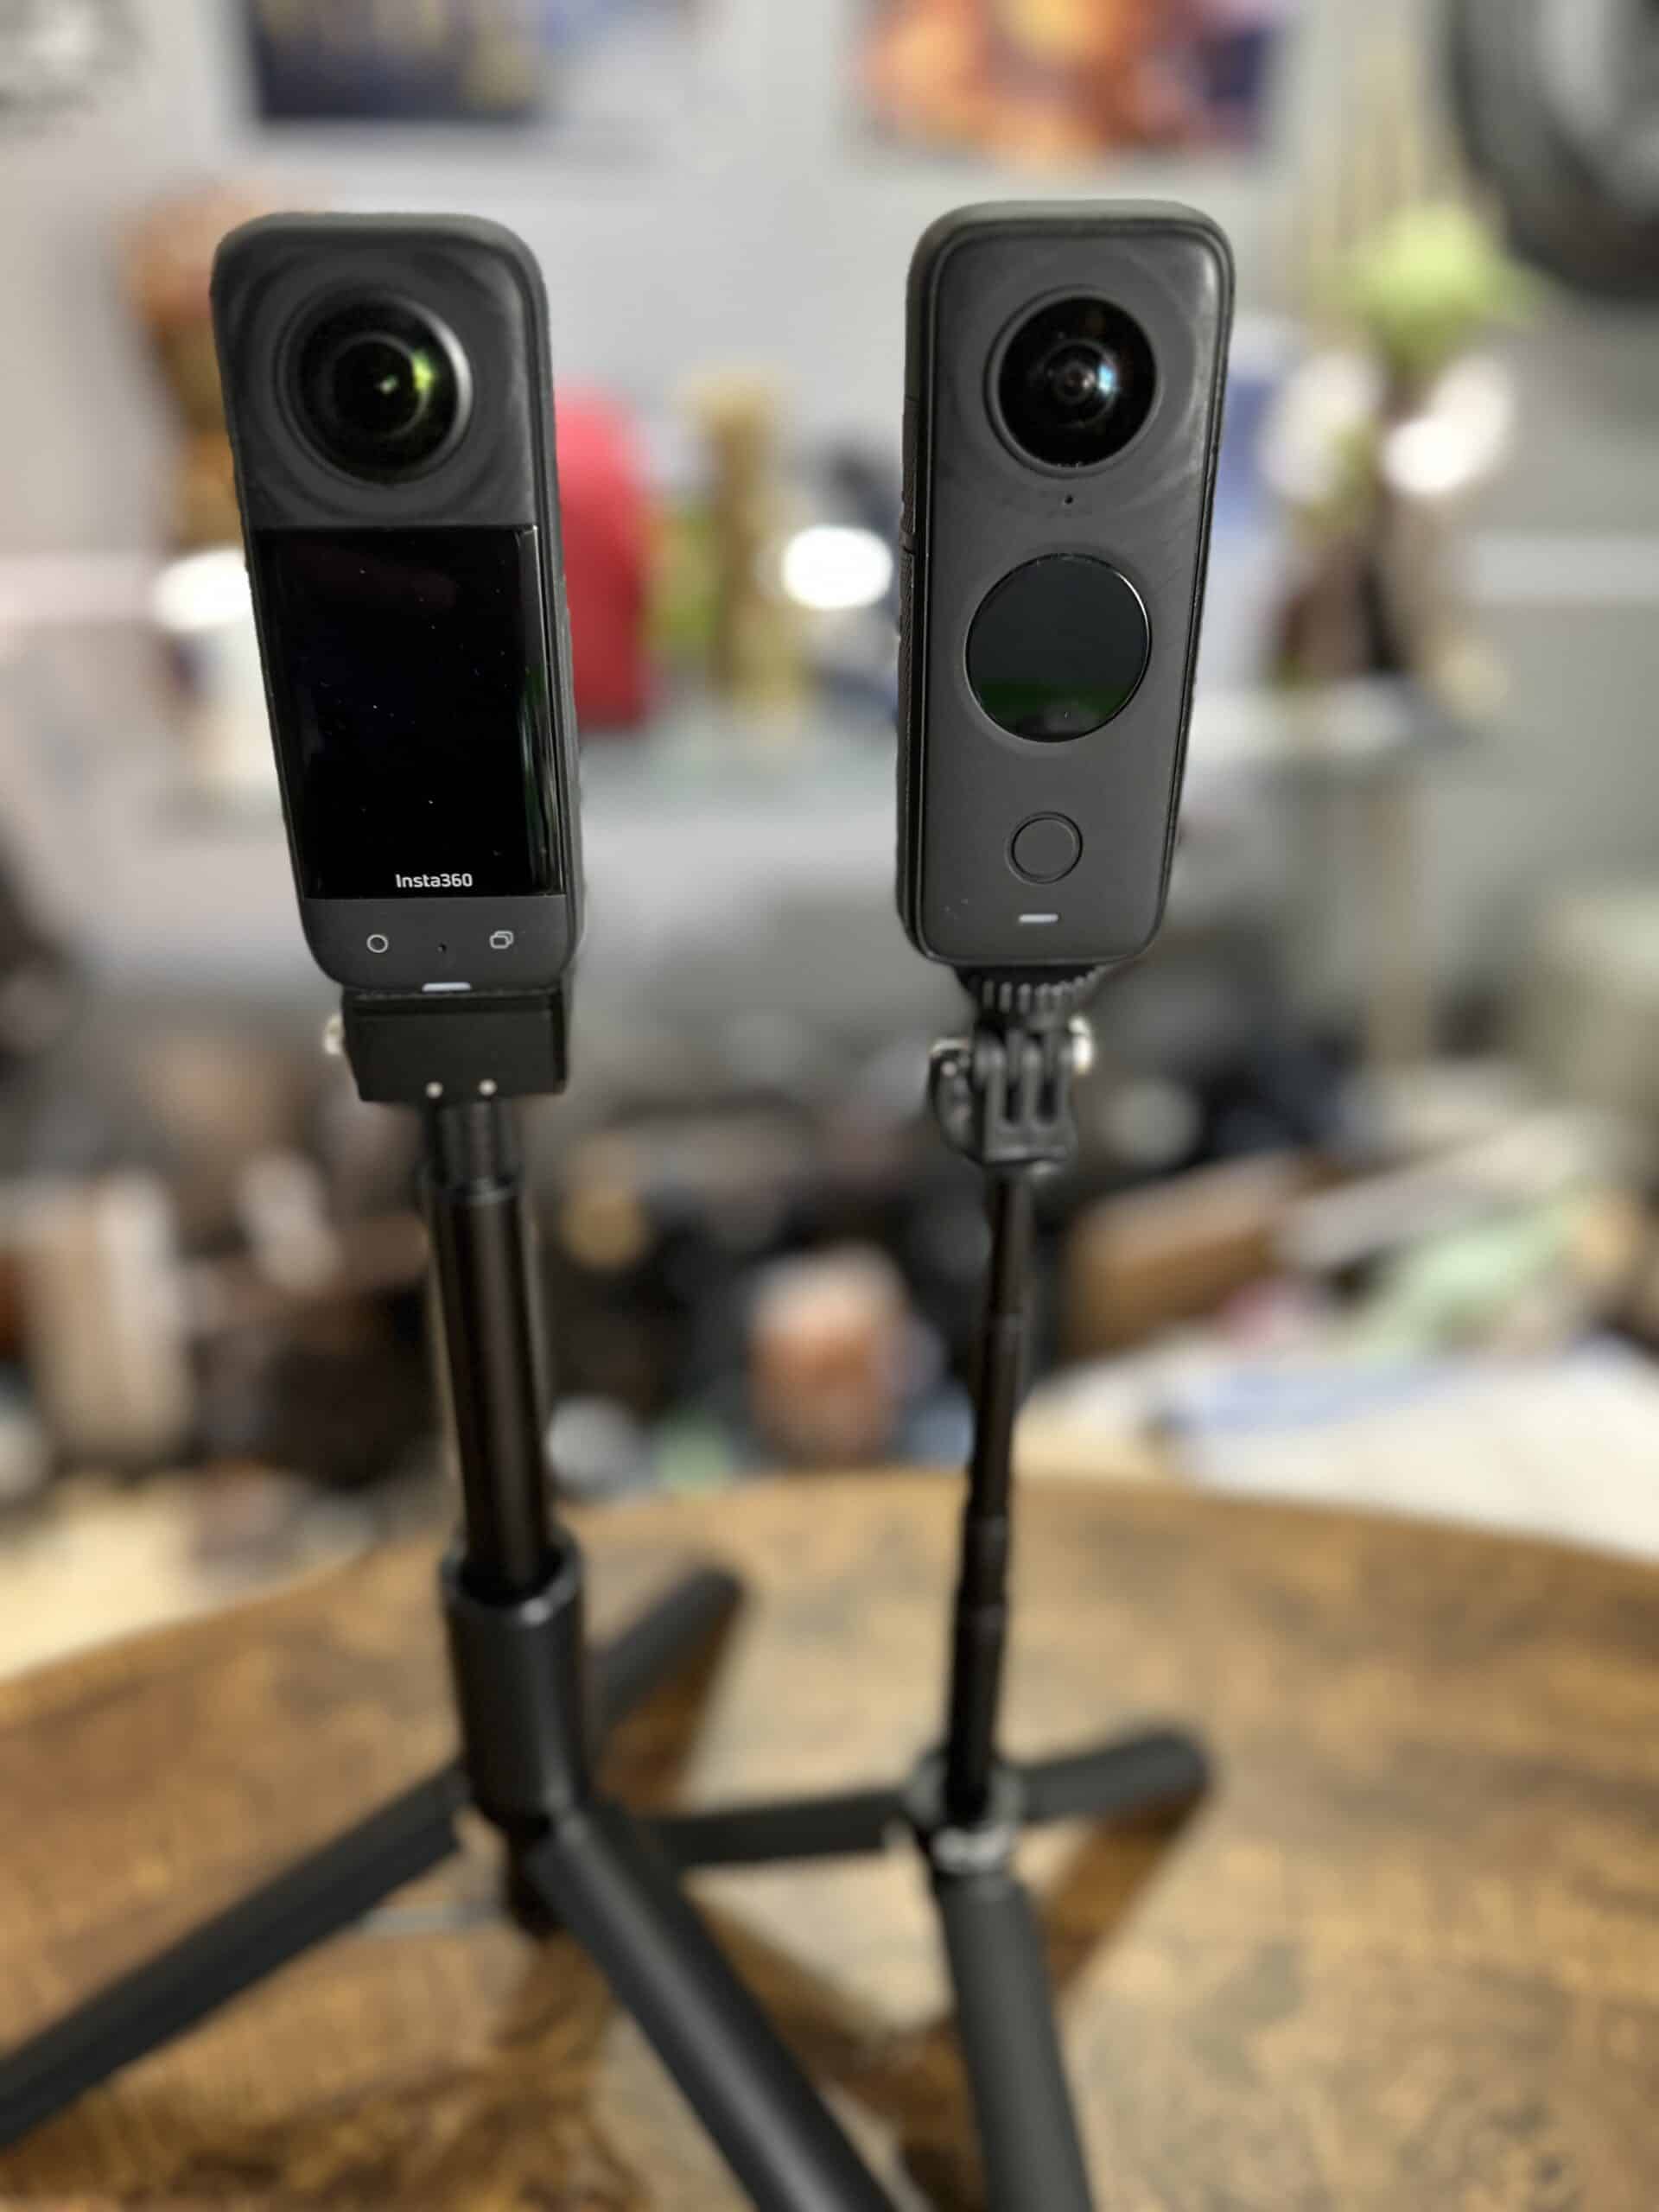 insta360 x2 and x3 360 cameras on invisible selfie sticks and tripods